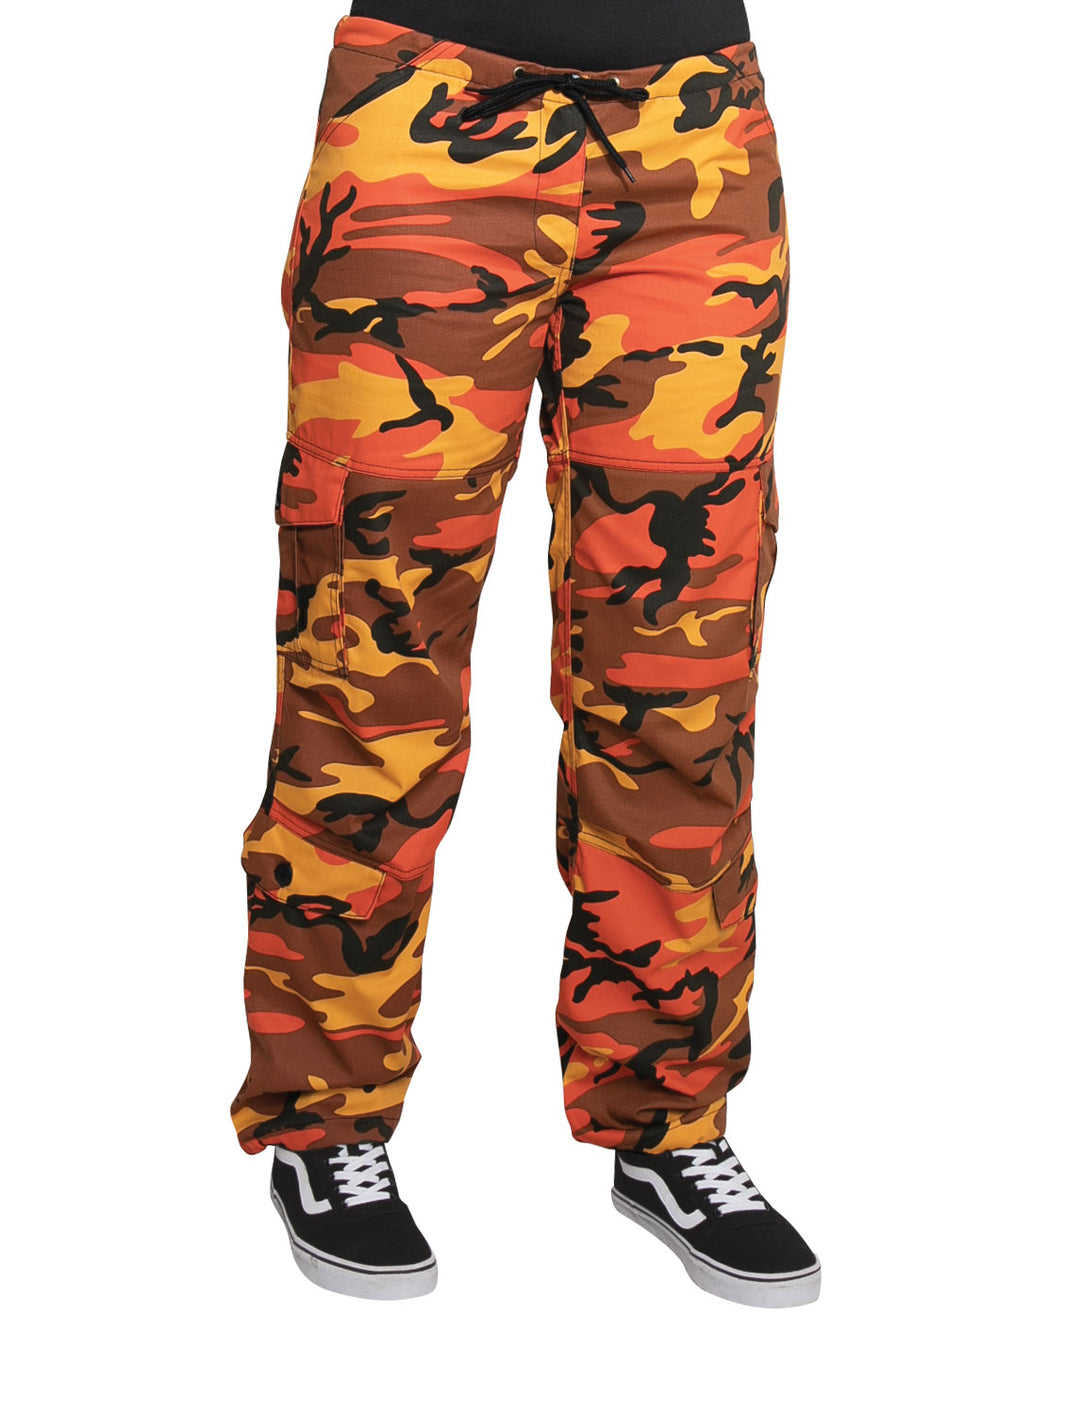 Rothco Womens Color Camouflage Paratrooper Fatigue Pants